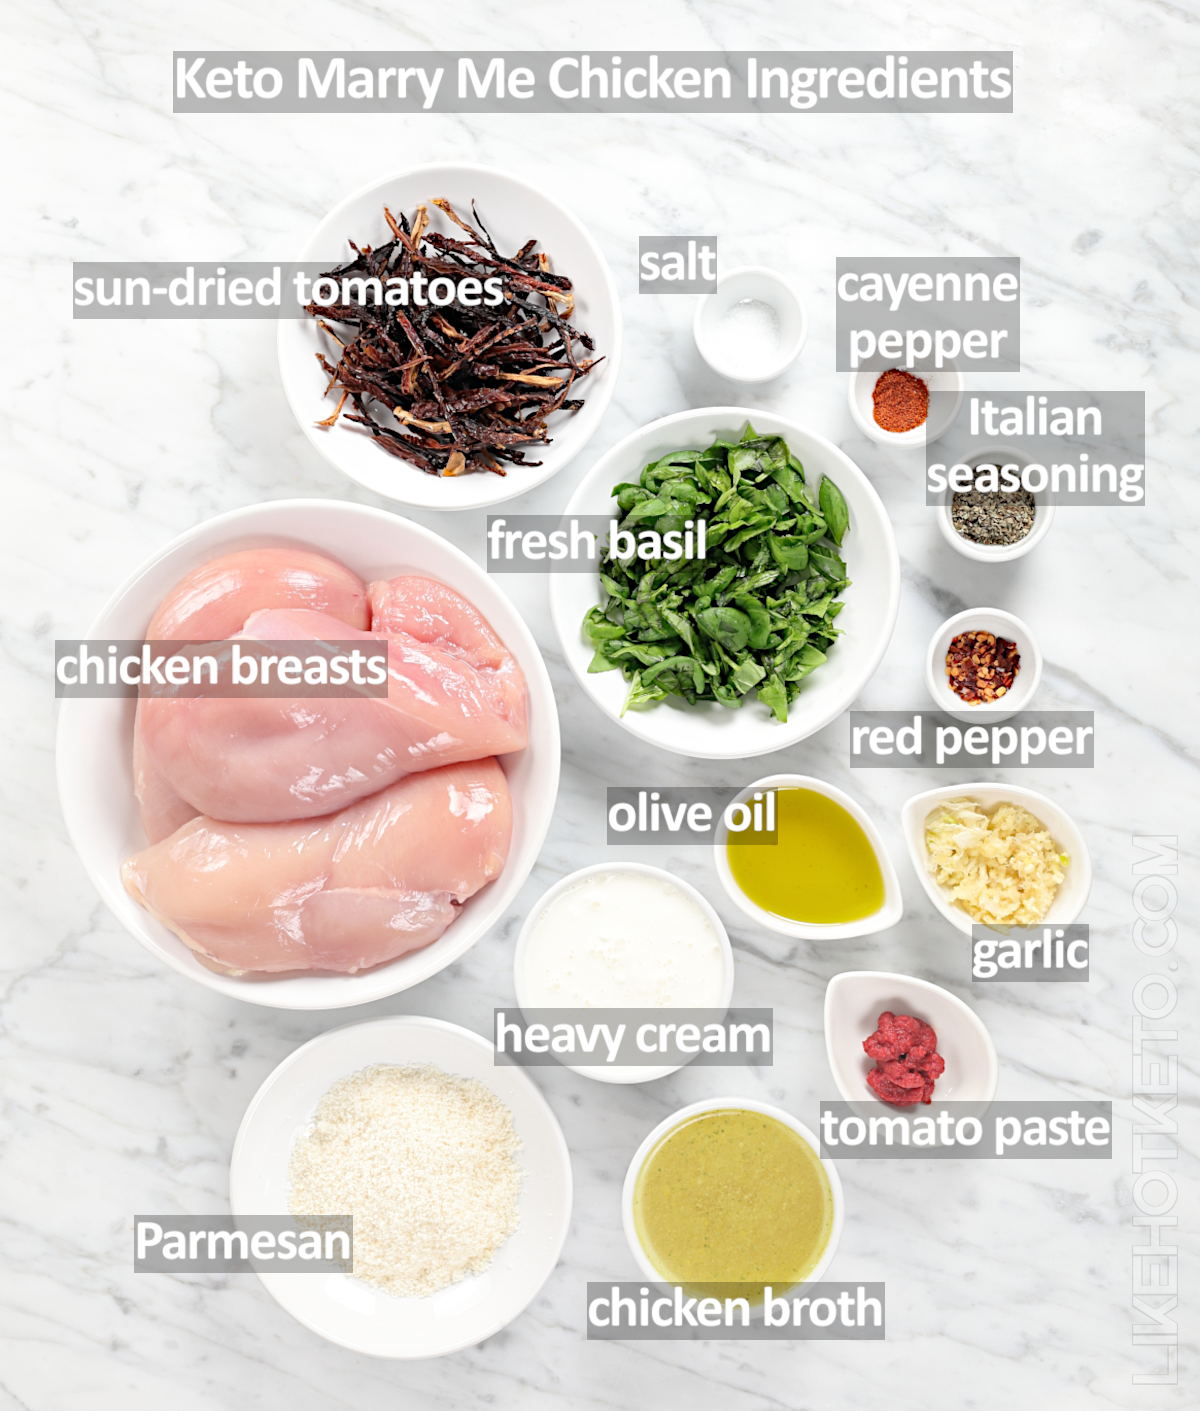 List of ingredients for keto Marry Me Chicken recipe.